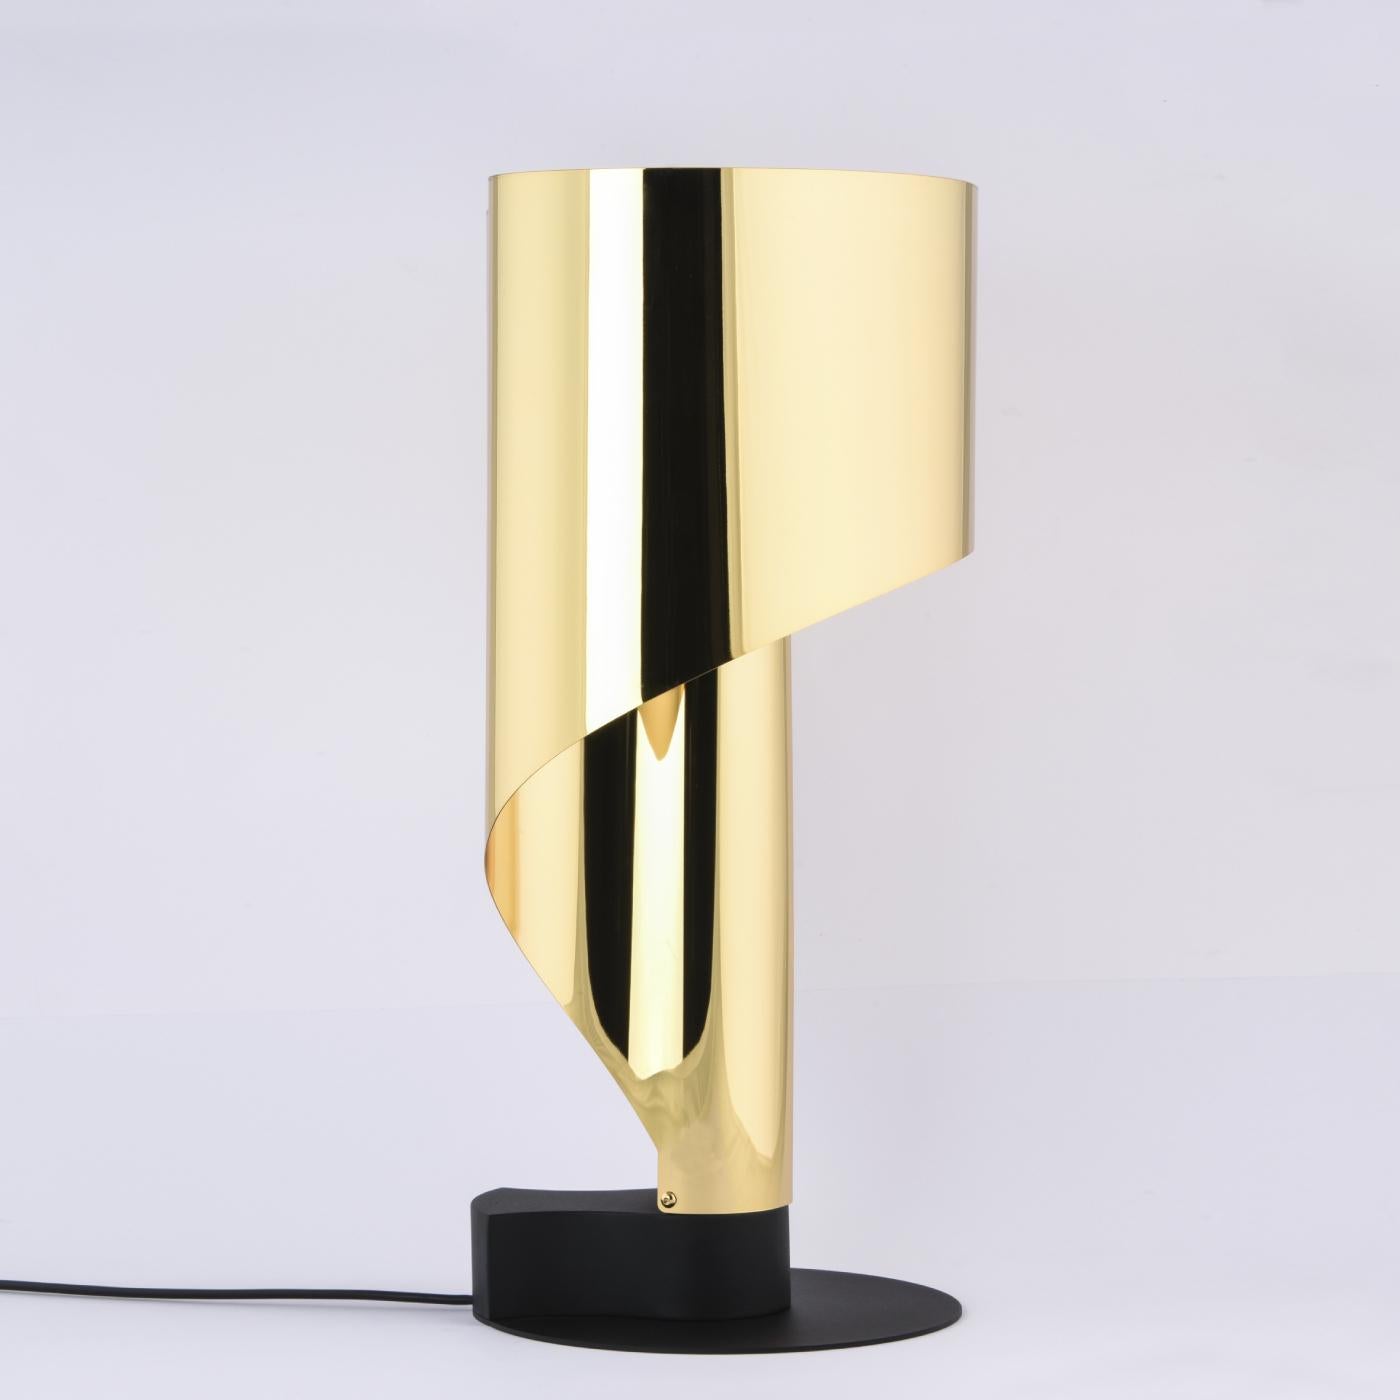 The unmistakable lamp designed by Corsini and Wiskemann, updated and is also available in burnished steel and gold versions.